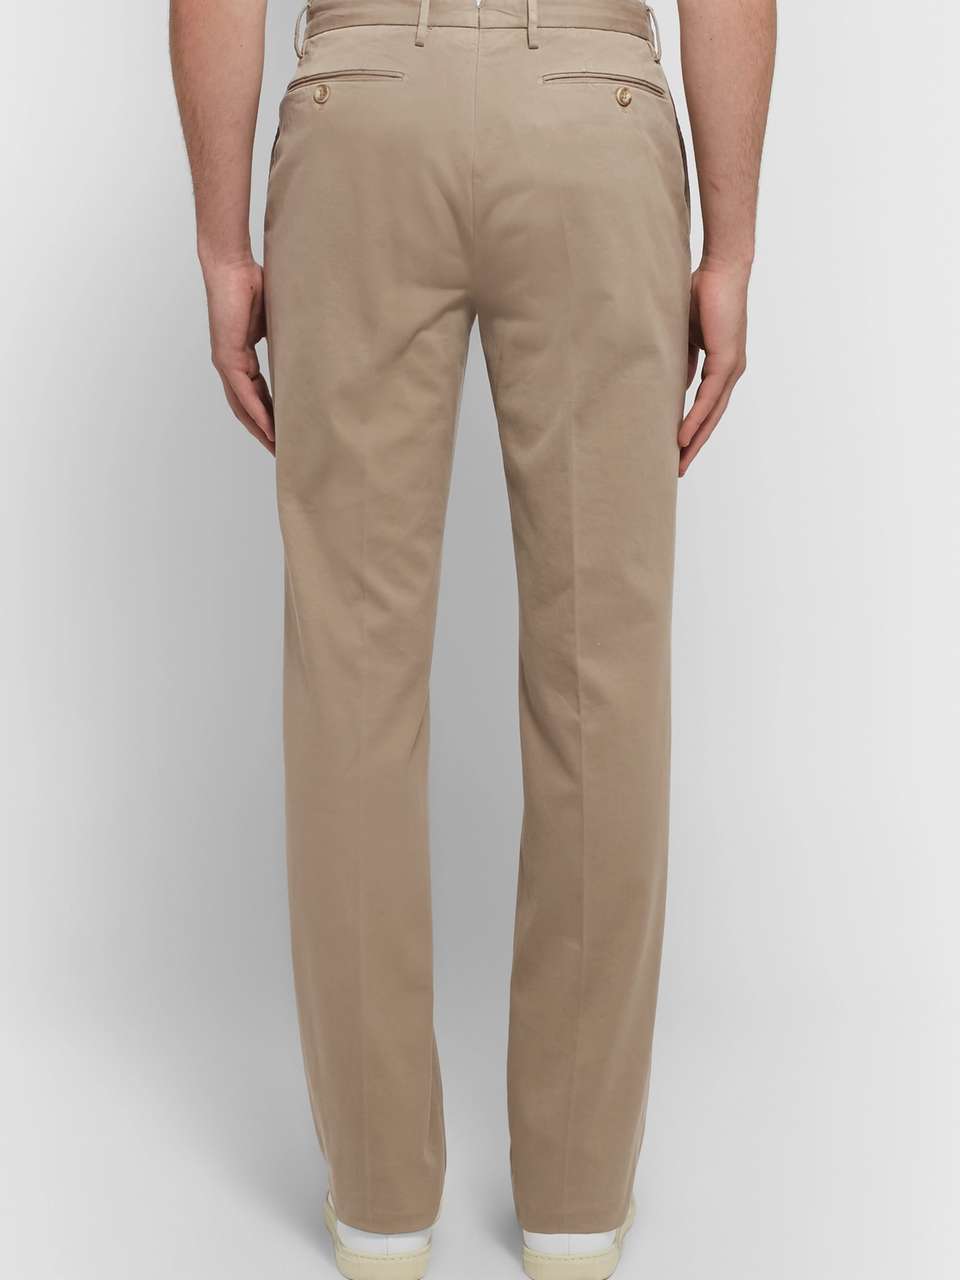 INCOTEX Four Season Relaxed-Fit Cotton-Blend Chinos for Men | MR PORTER